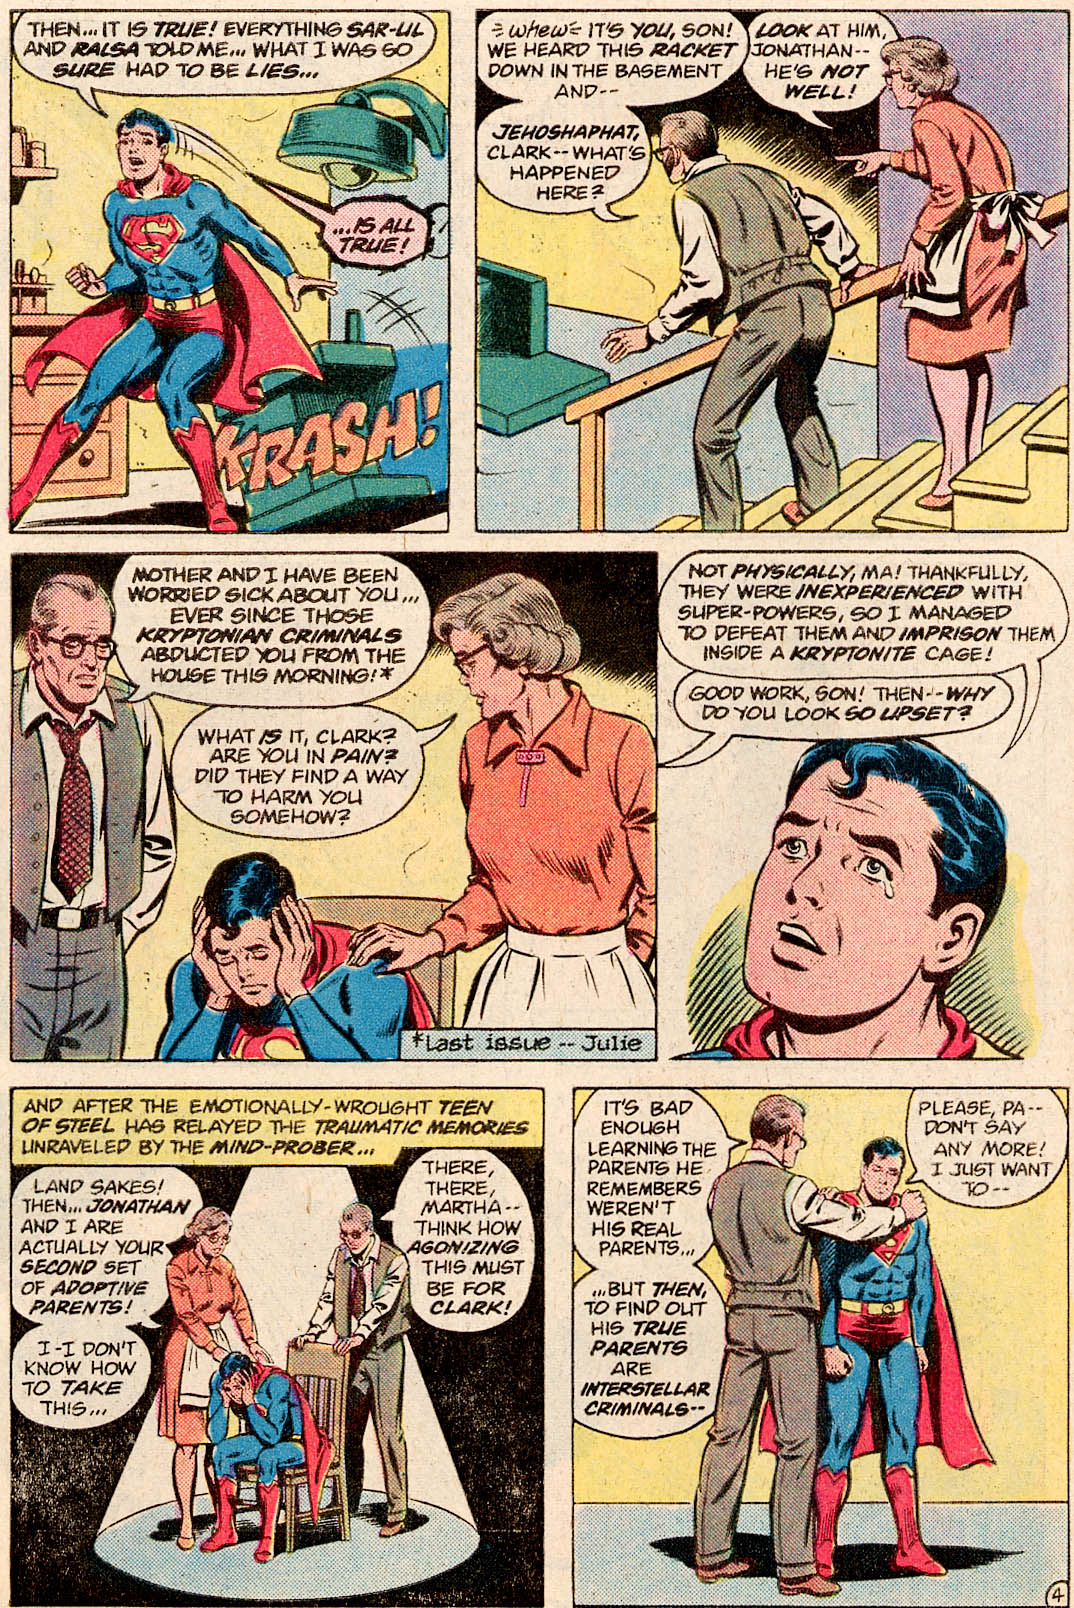 The New Adventures of Superboy 28 Page 4